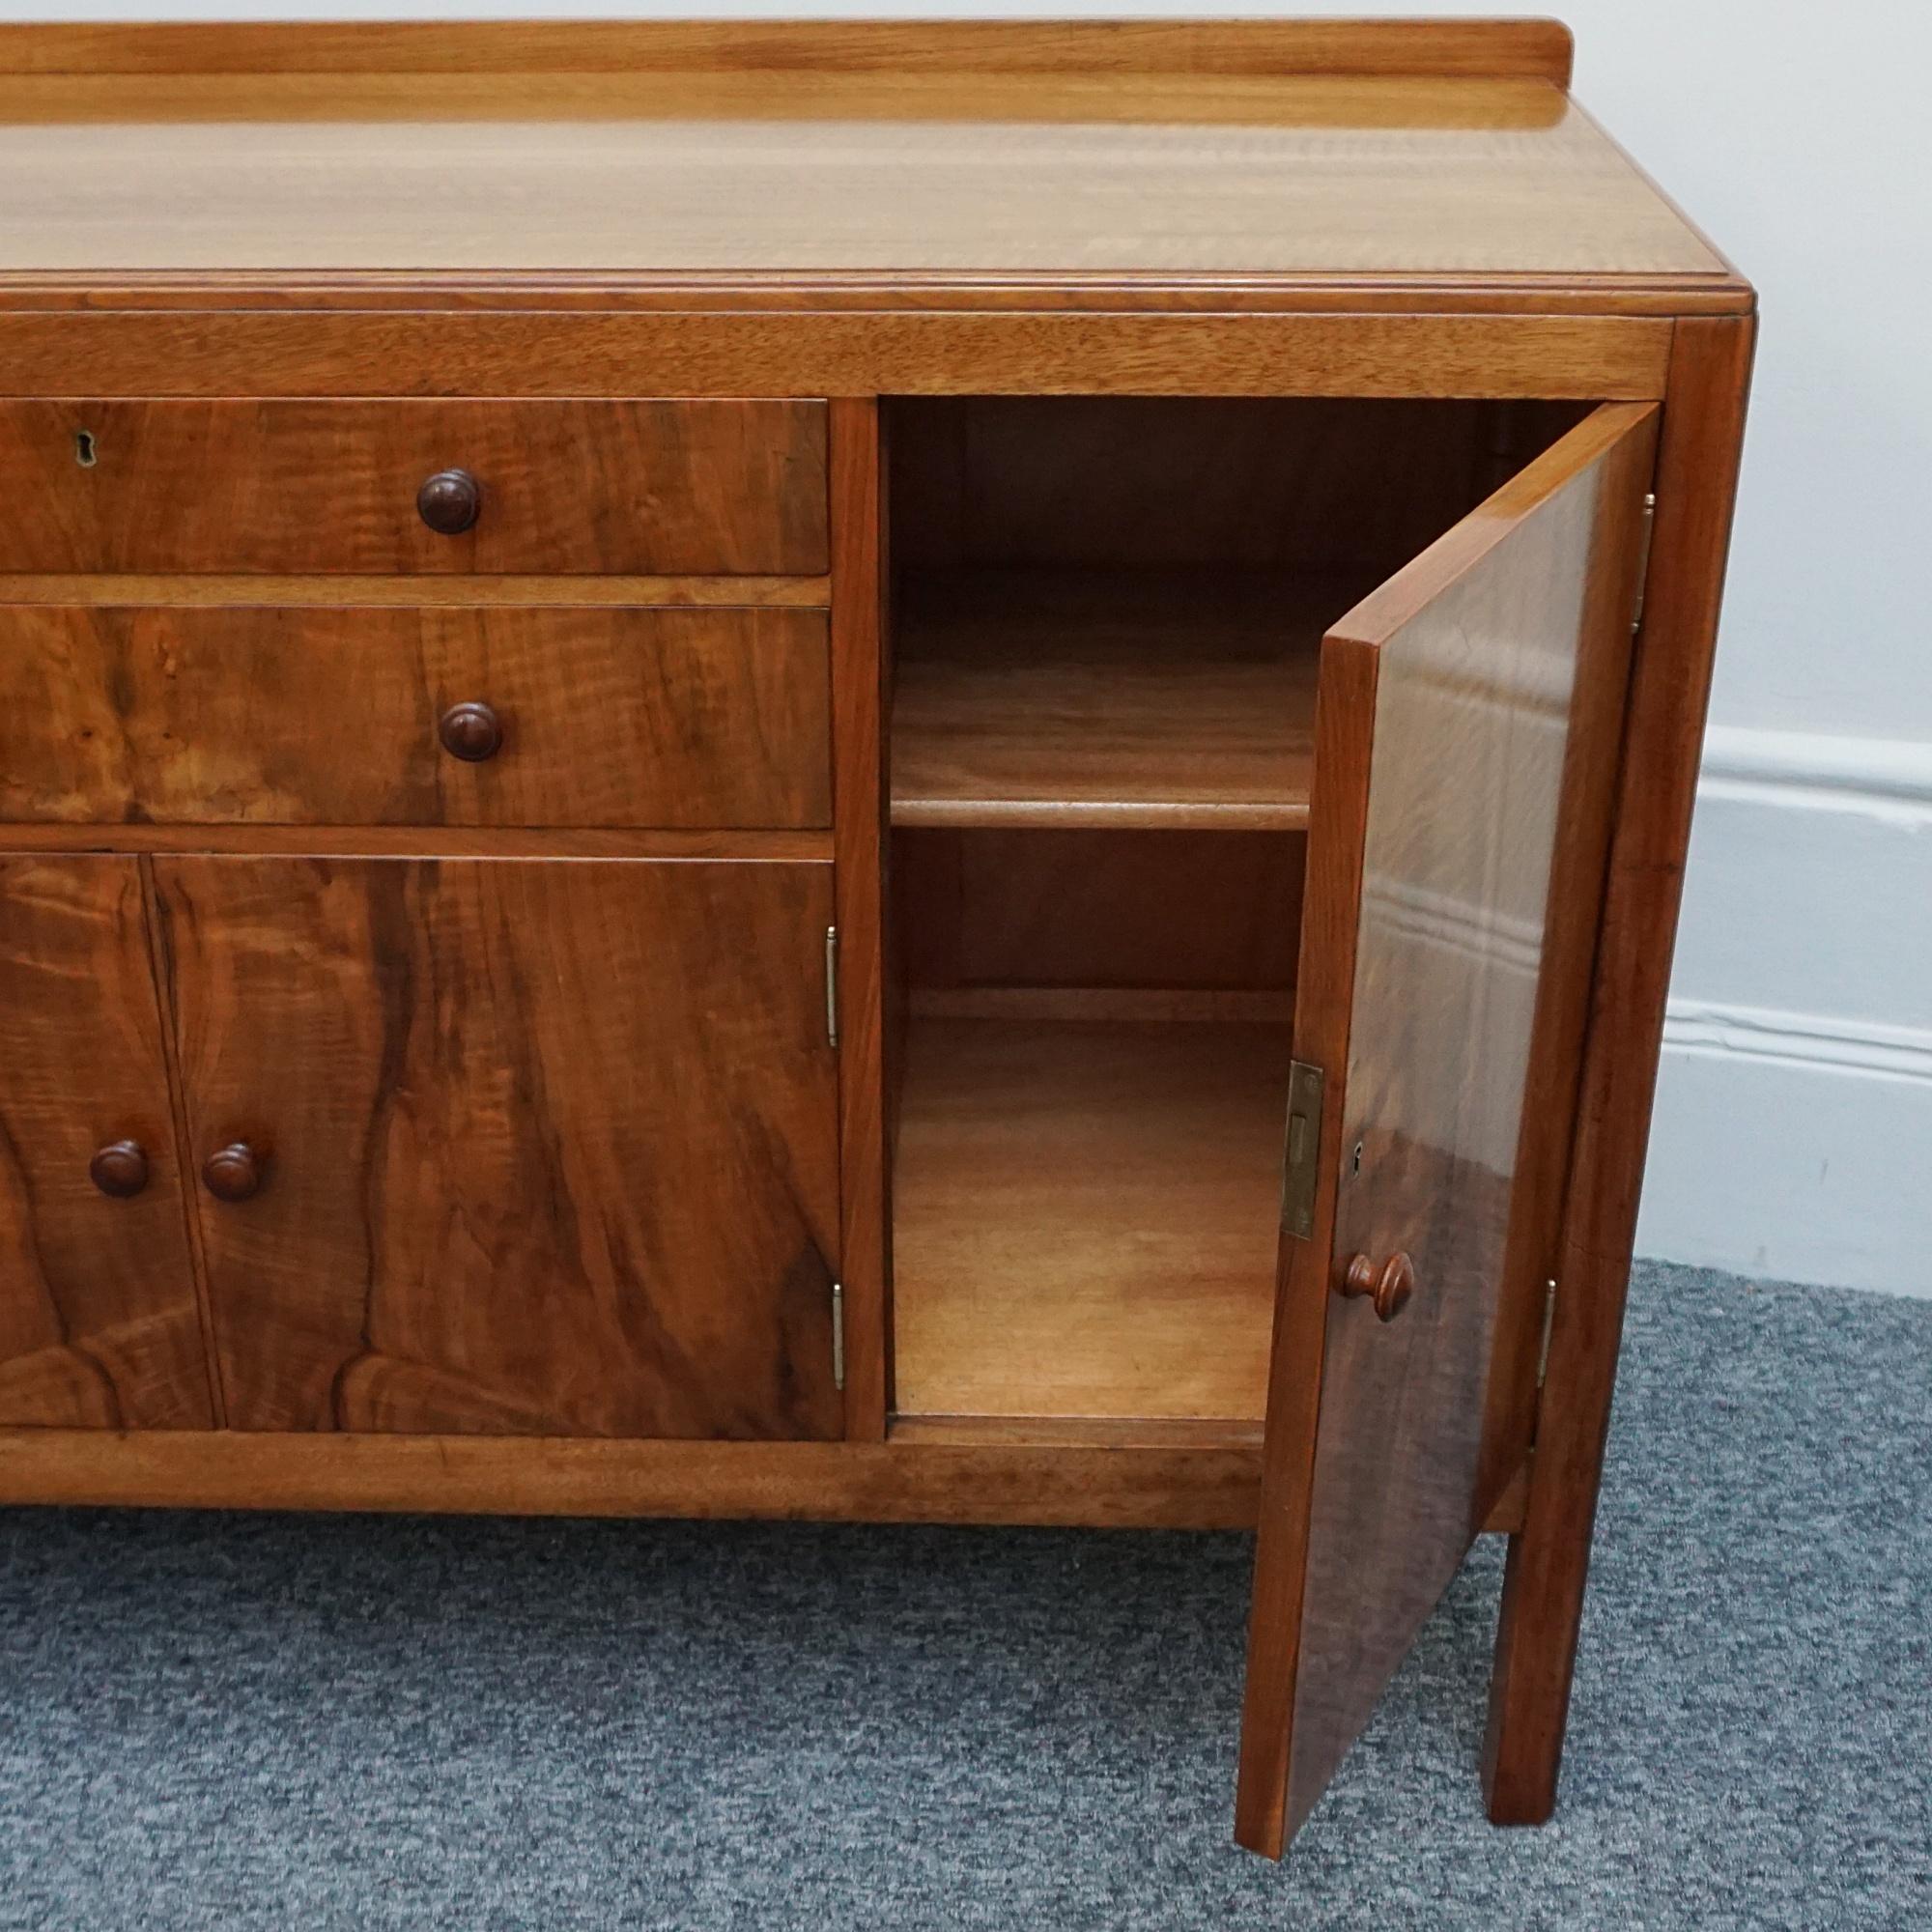 Vintage Art Deco Sideboard by Heal's of London Burr and Figured Walnut For Sale 3